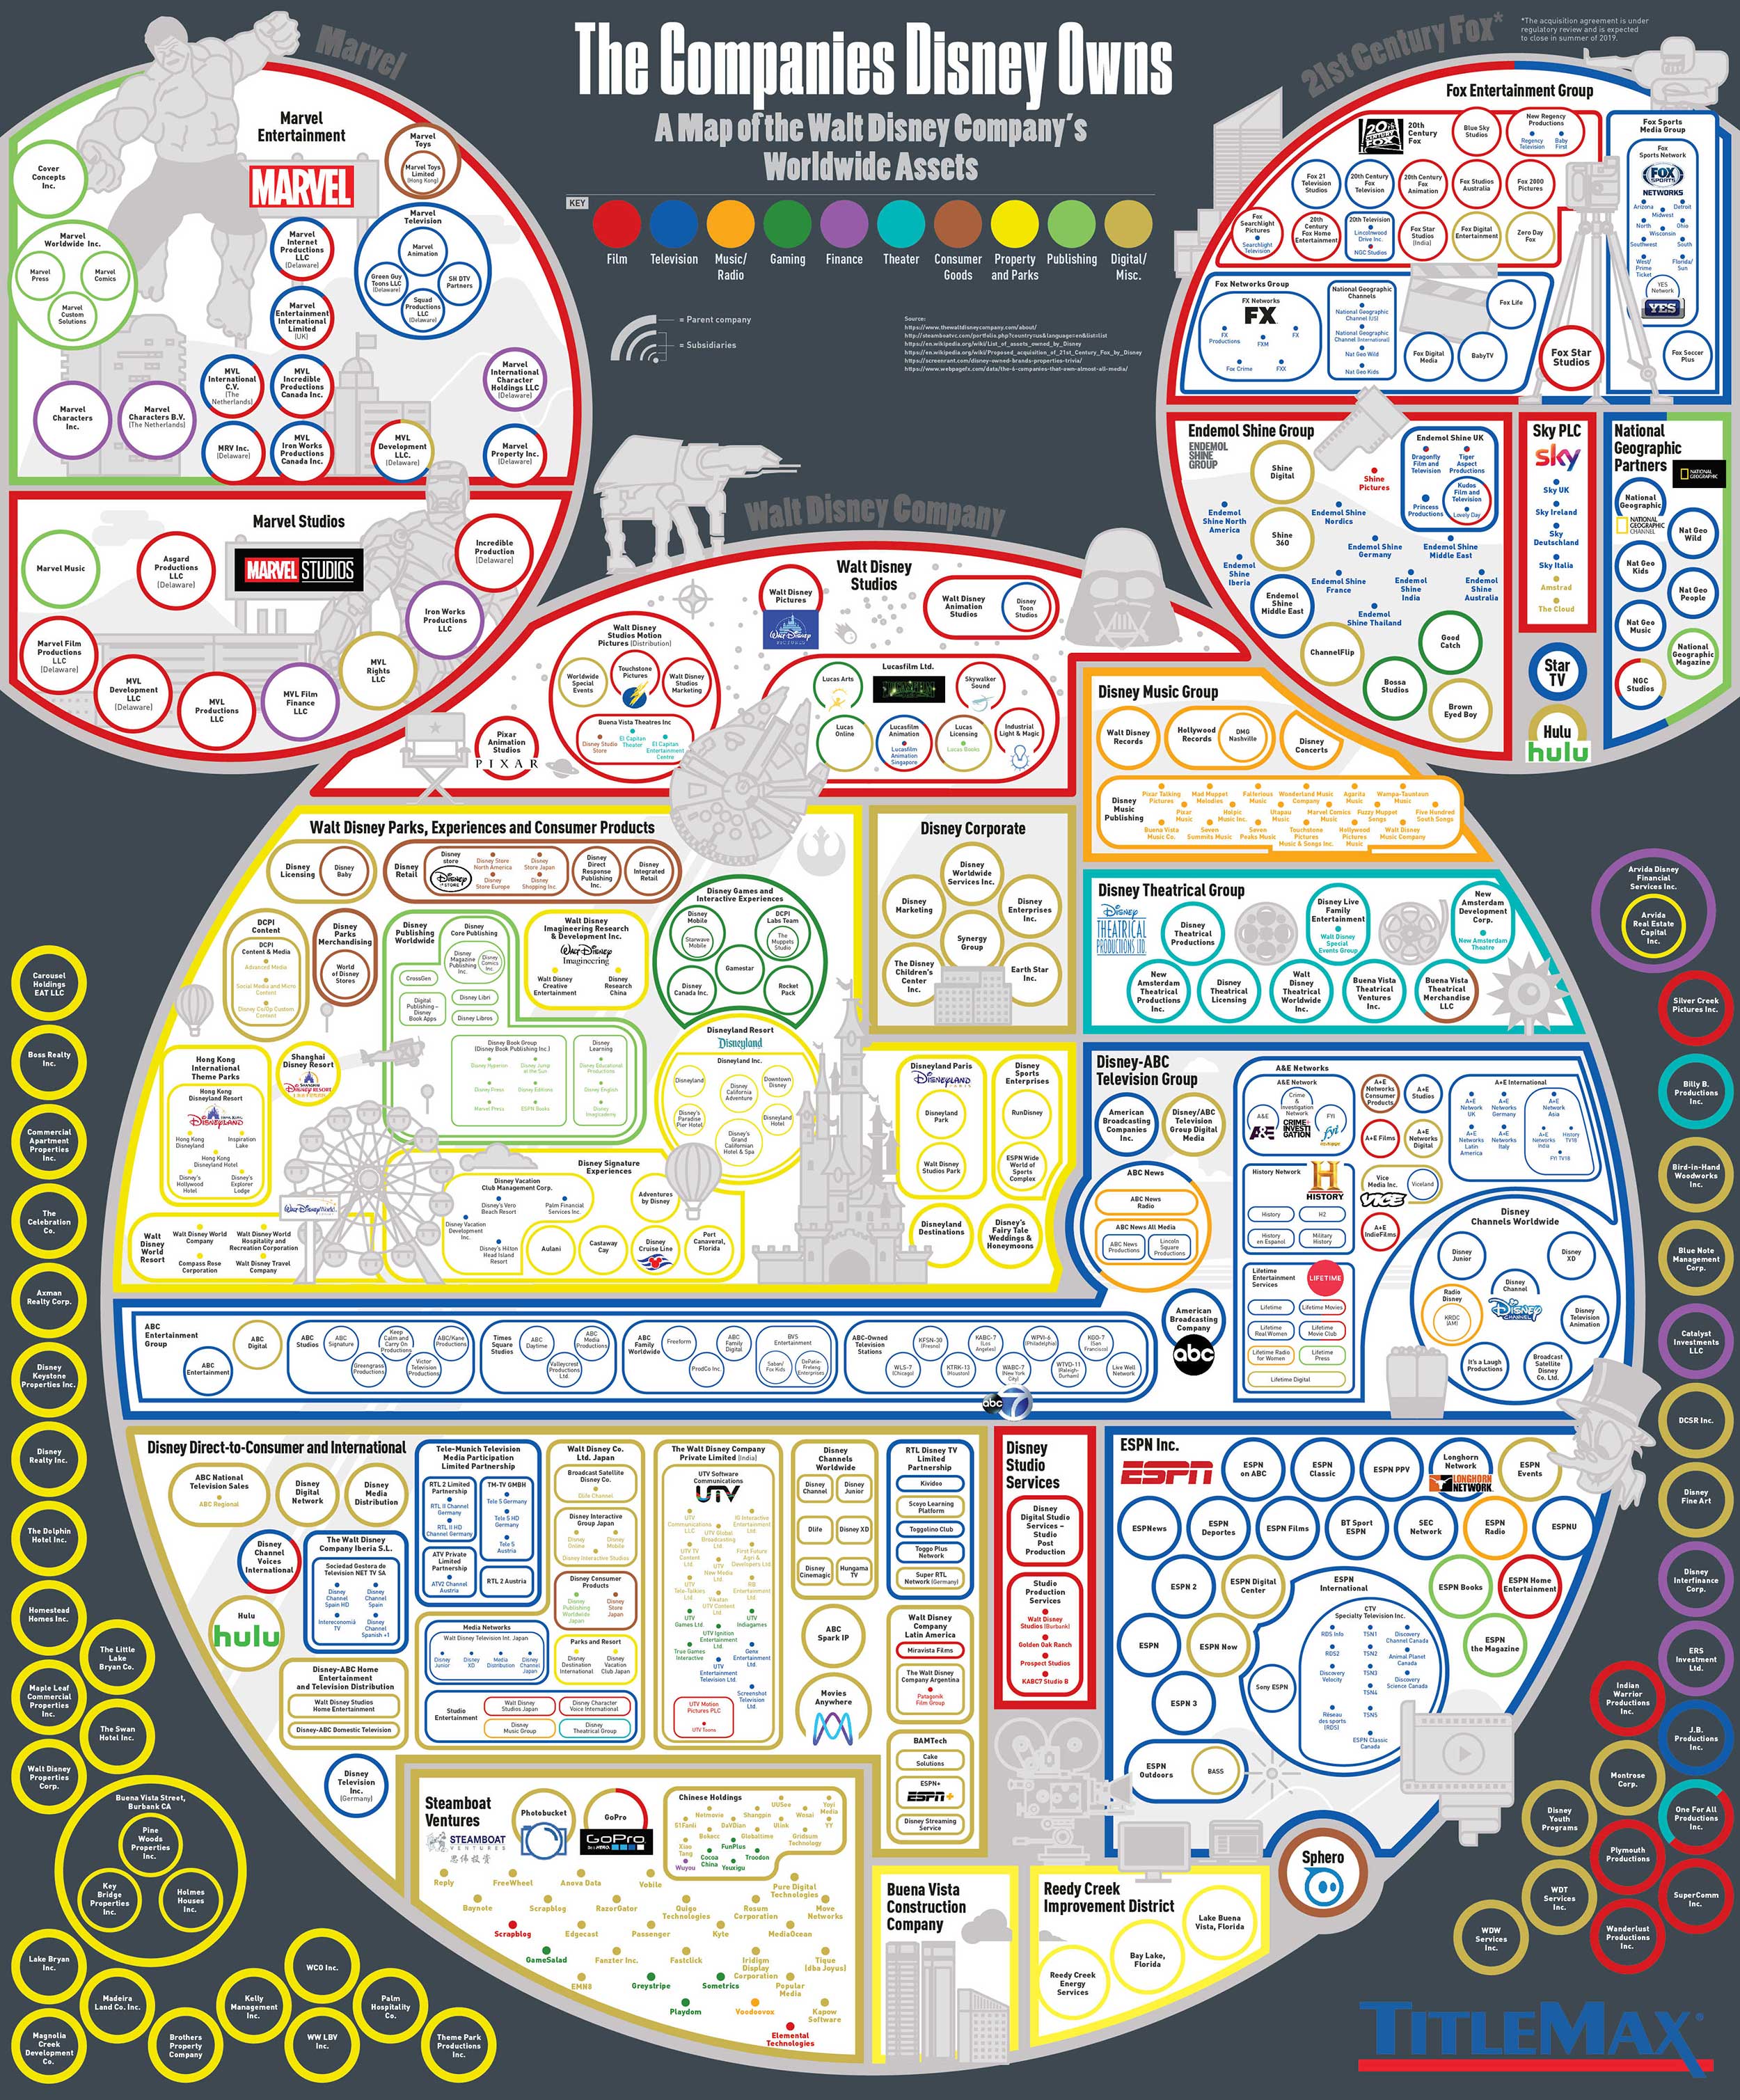 What are 5 companies Disney owns?